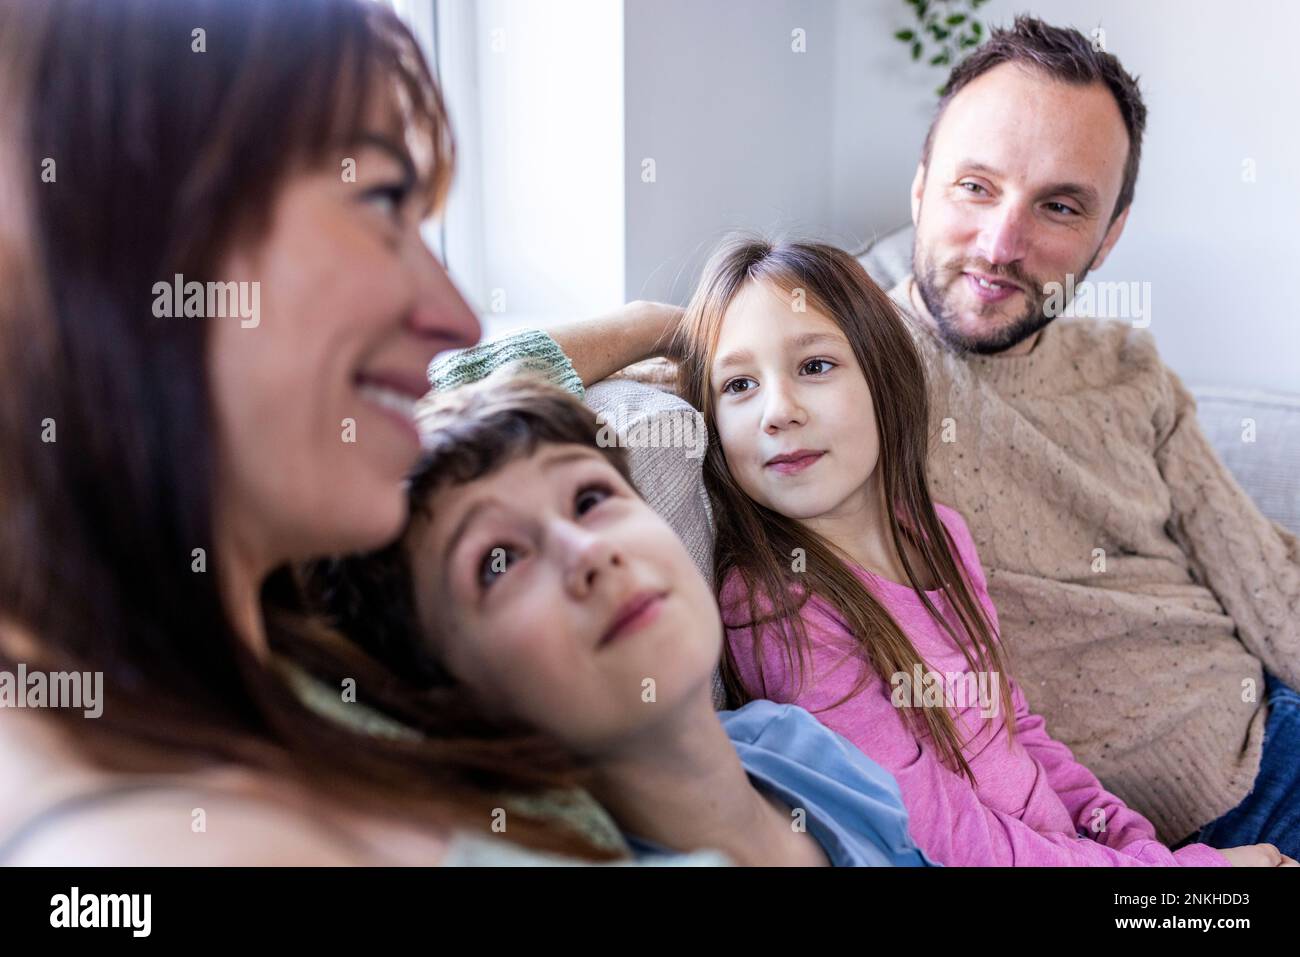 Smiling woman spending time with family at home Stock Photo